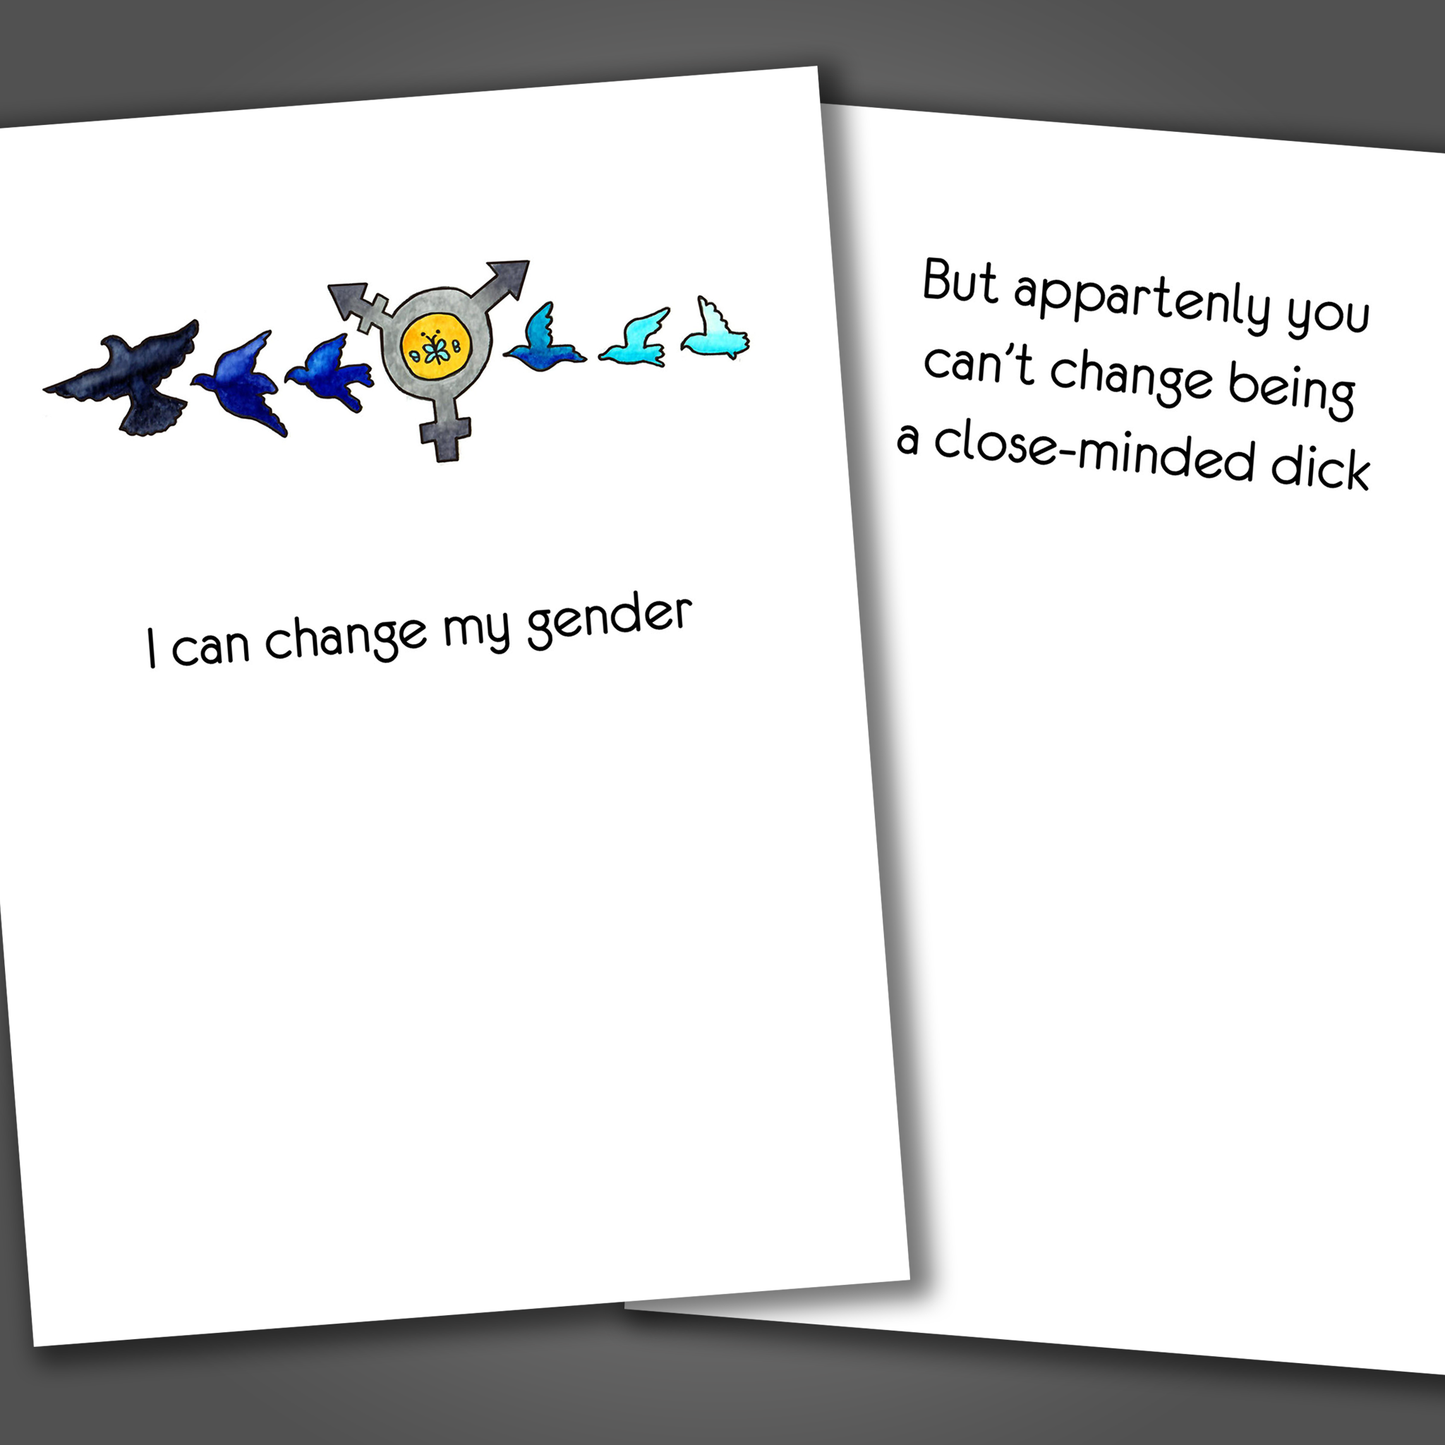 Funny LGBTQ support card with drawings of doves on the front of the card with the symbol for transgender. Inside the card is a funny joke calling the receiver a close-minded dick.